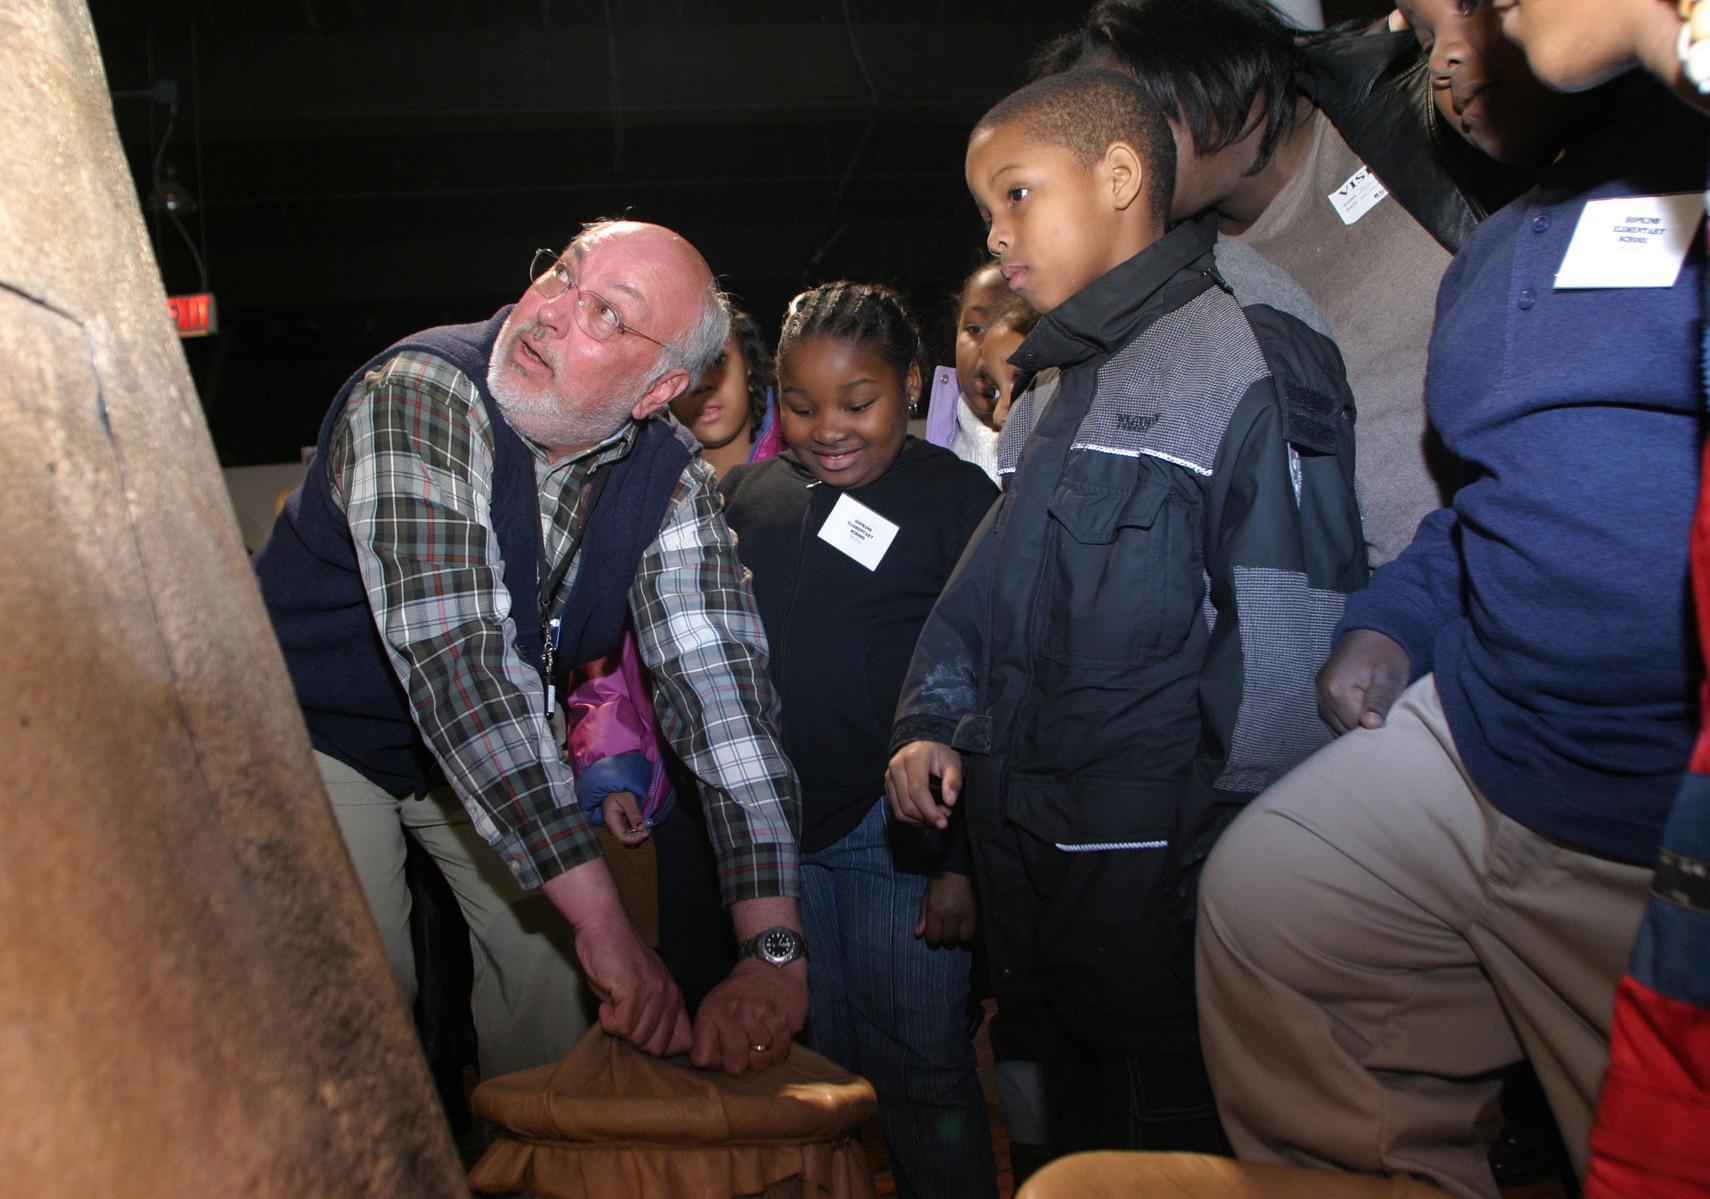 An older gentleman wearing a SCSM volunteer demonstrates an historic pot to a group of third grade students.